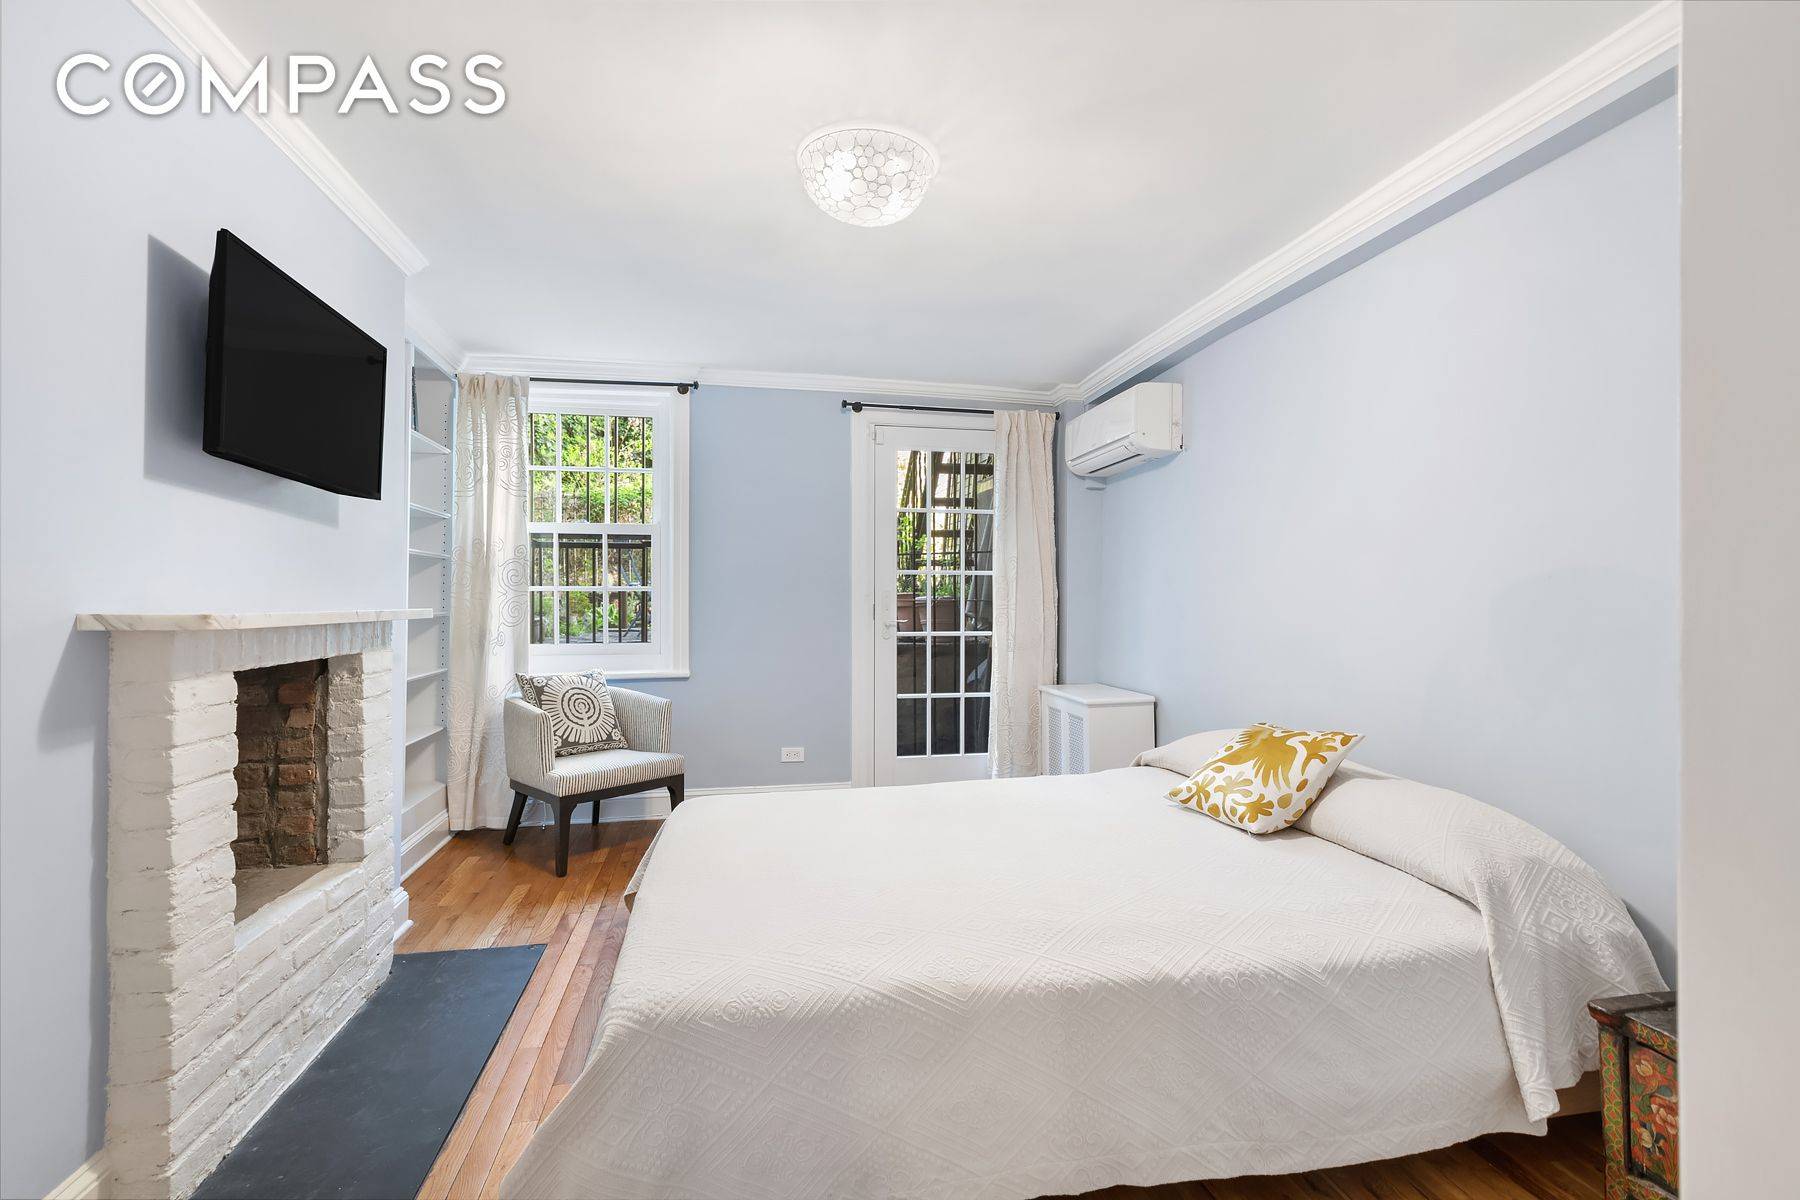 A rare offering this charming one bedroom apartment is your bohemian west village fantasy.